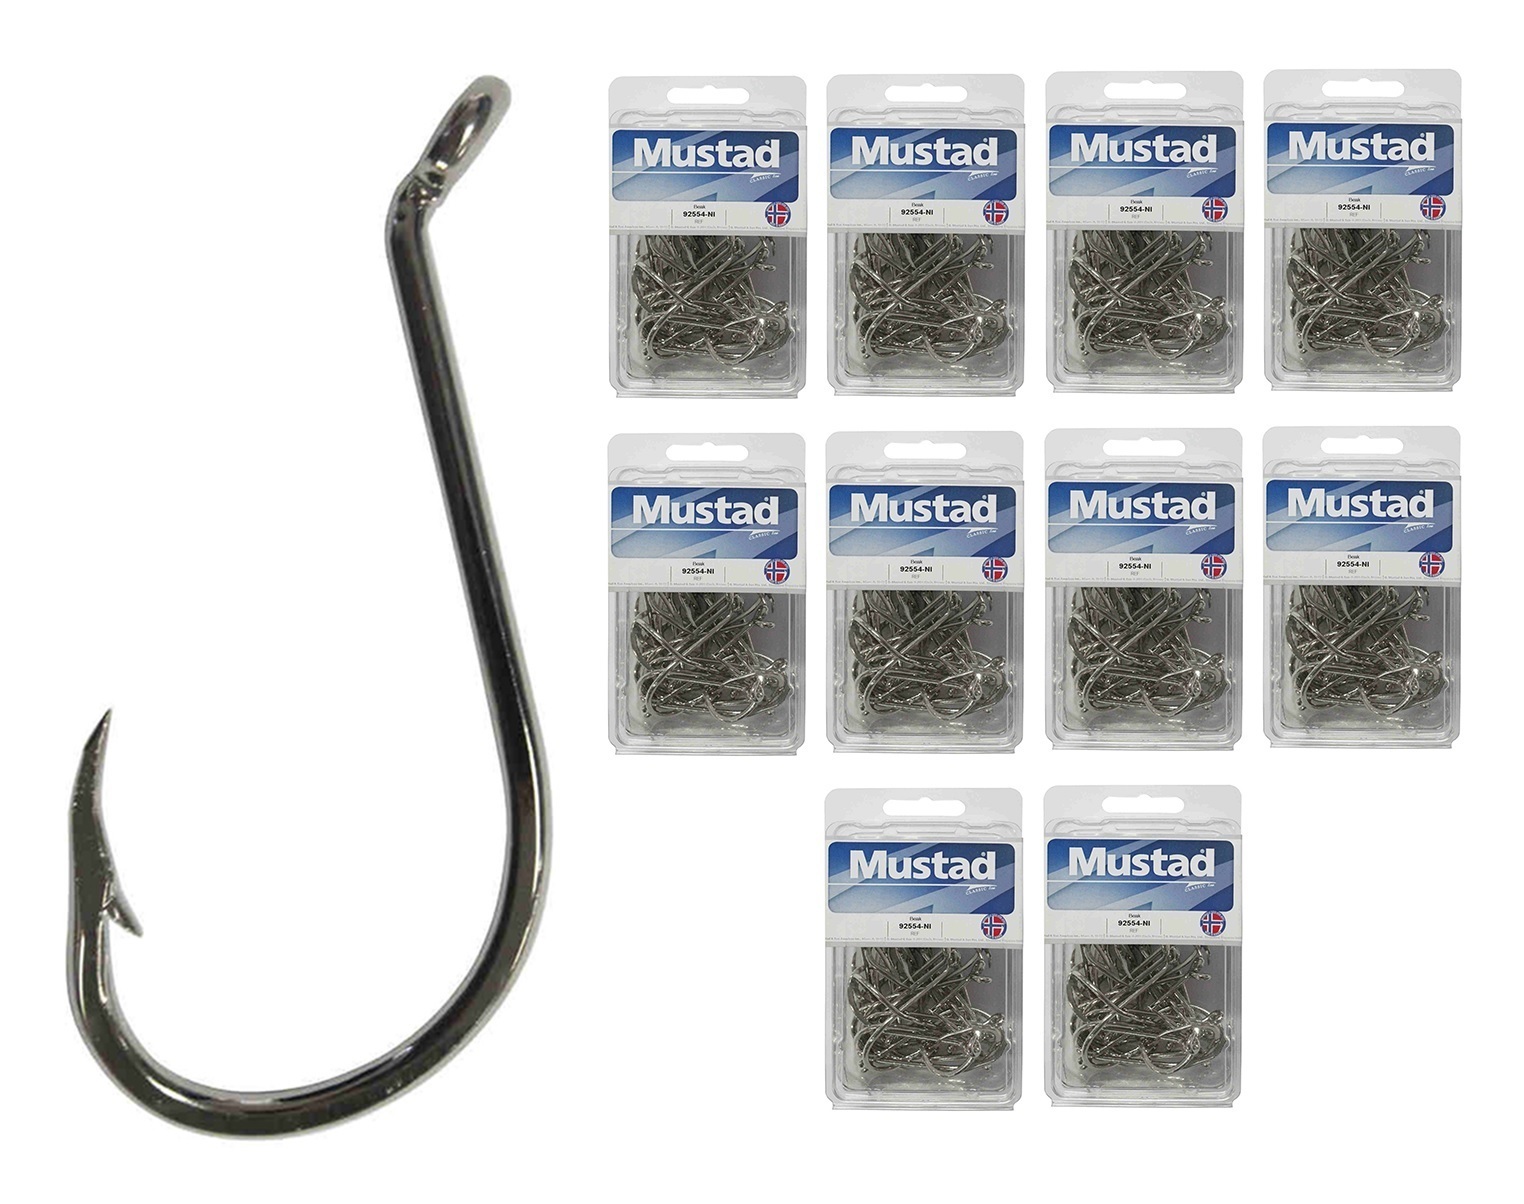 10 Boxes of 92554 2x Strong Nickle Plated Octopus Fishing Hooks - Size 8